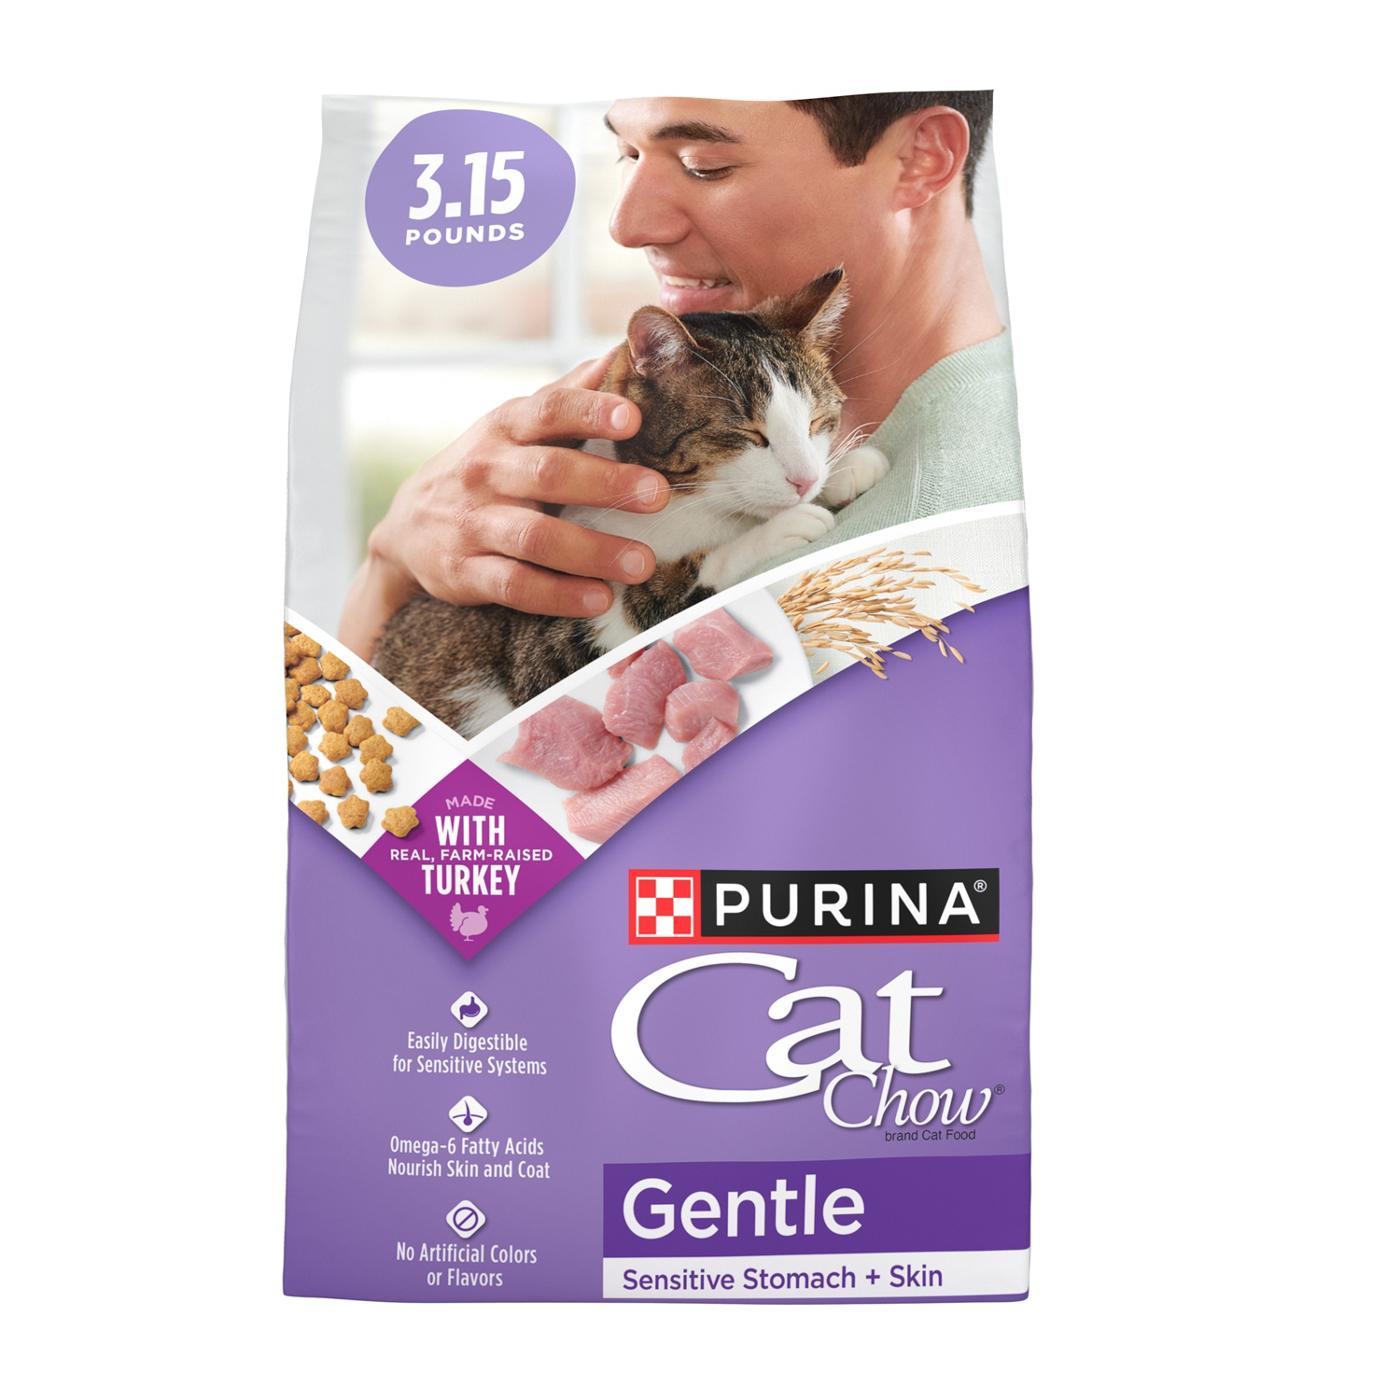 Purina Cat Chow Gentle Sensitive Stomach Skin Dry Food - Shop Food at H-E-B